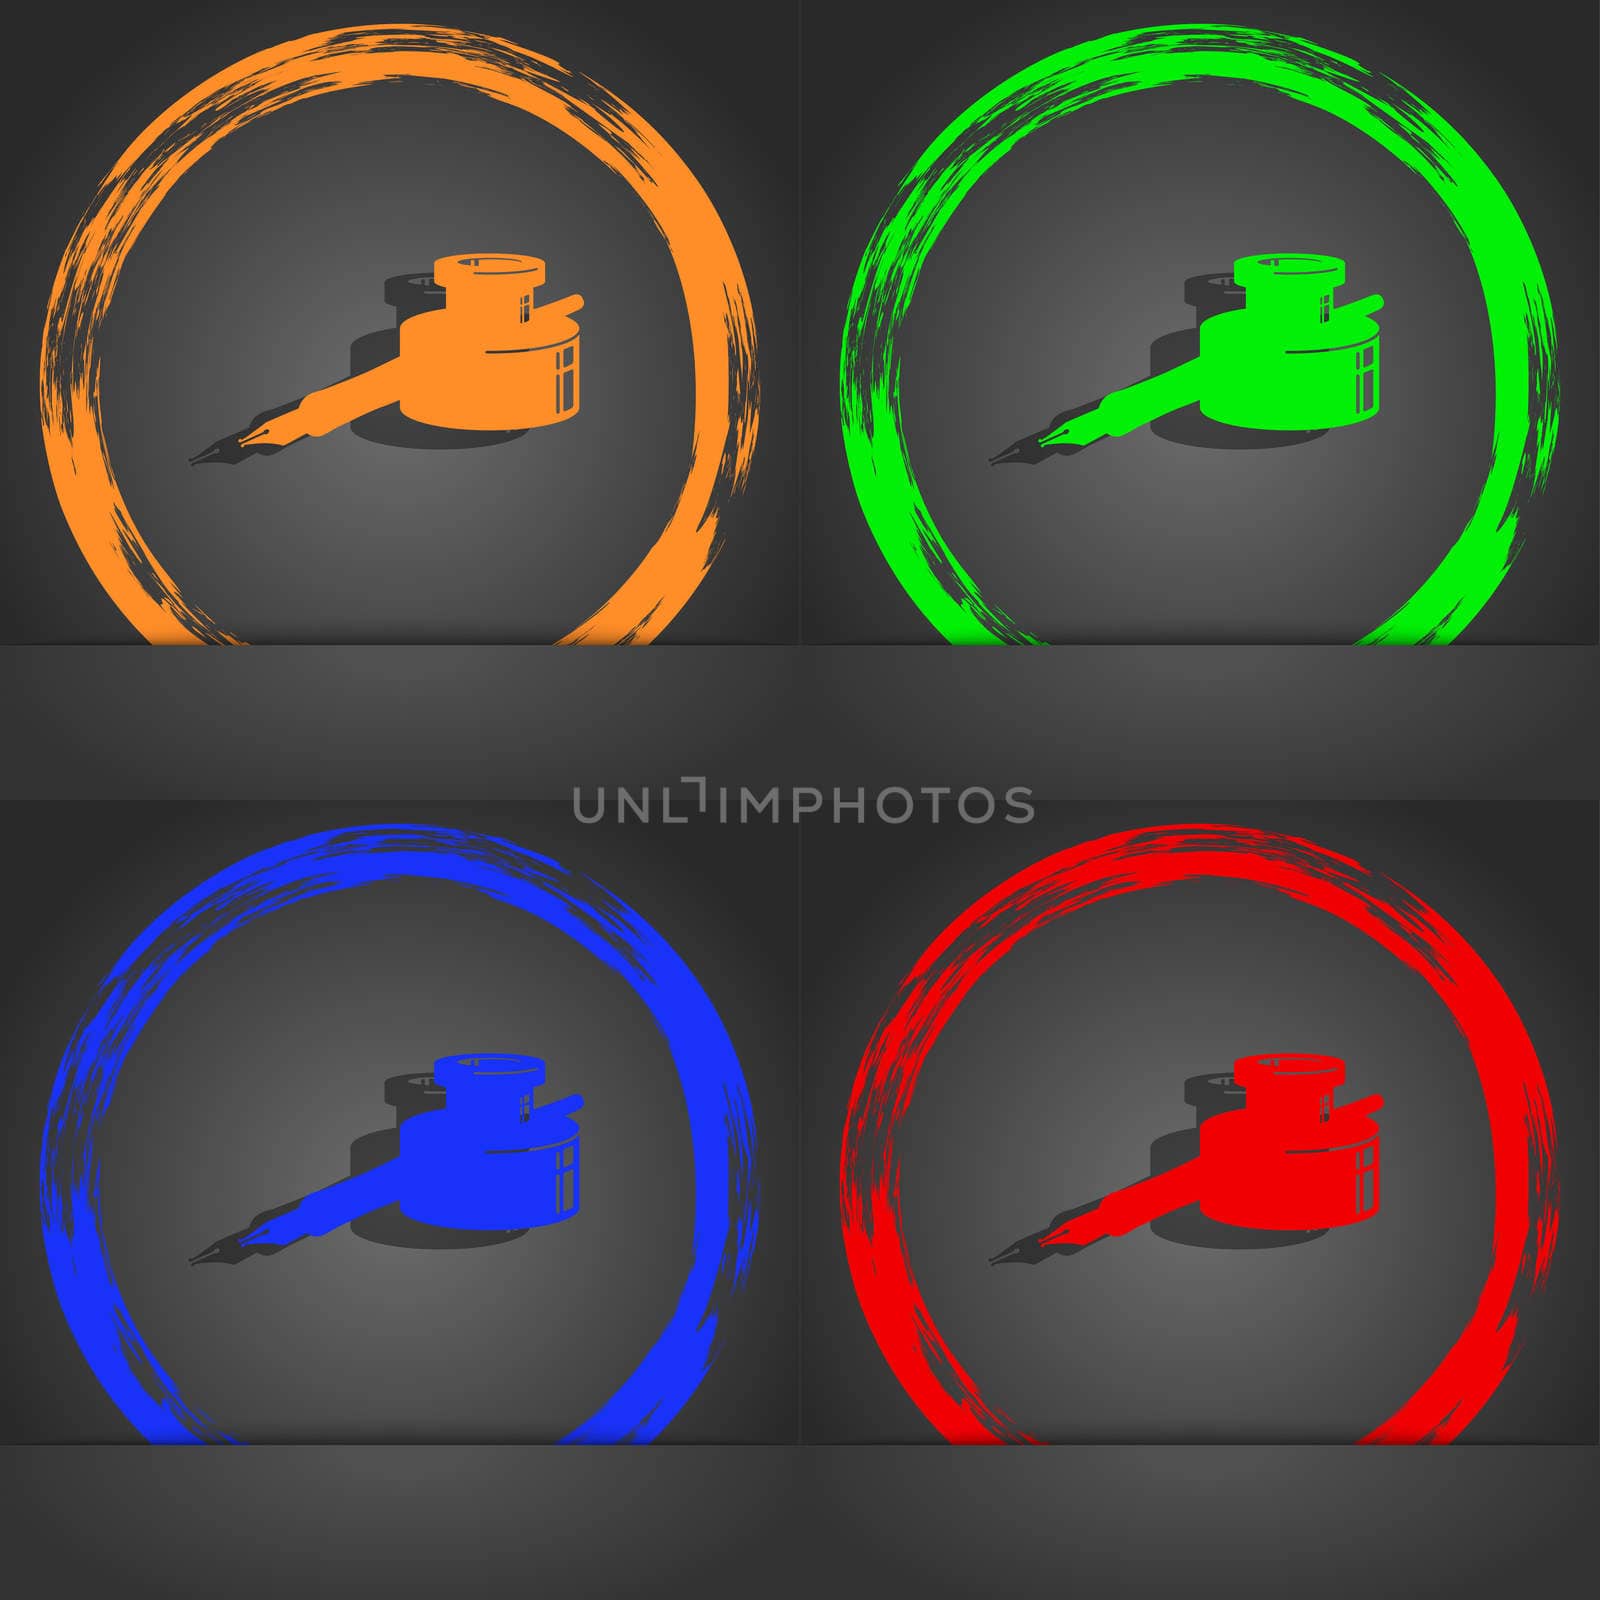 pen and ink icon symbol. Fashionable modern style. In the orange, green, blue, green design. illustration